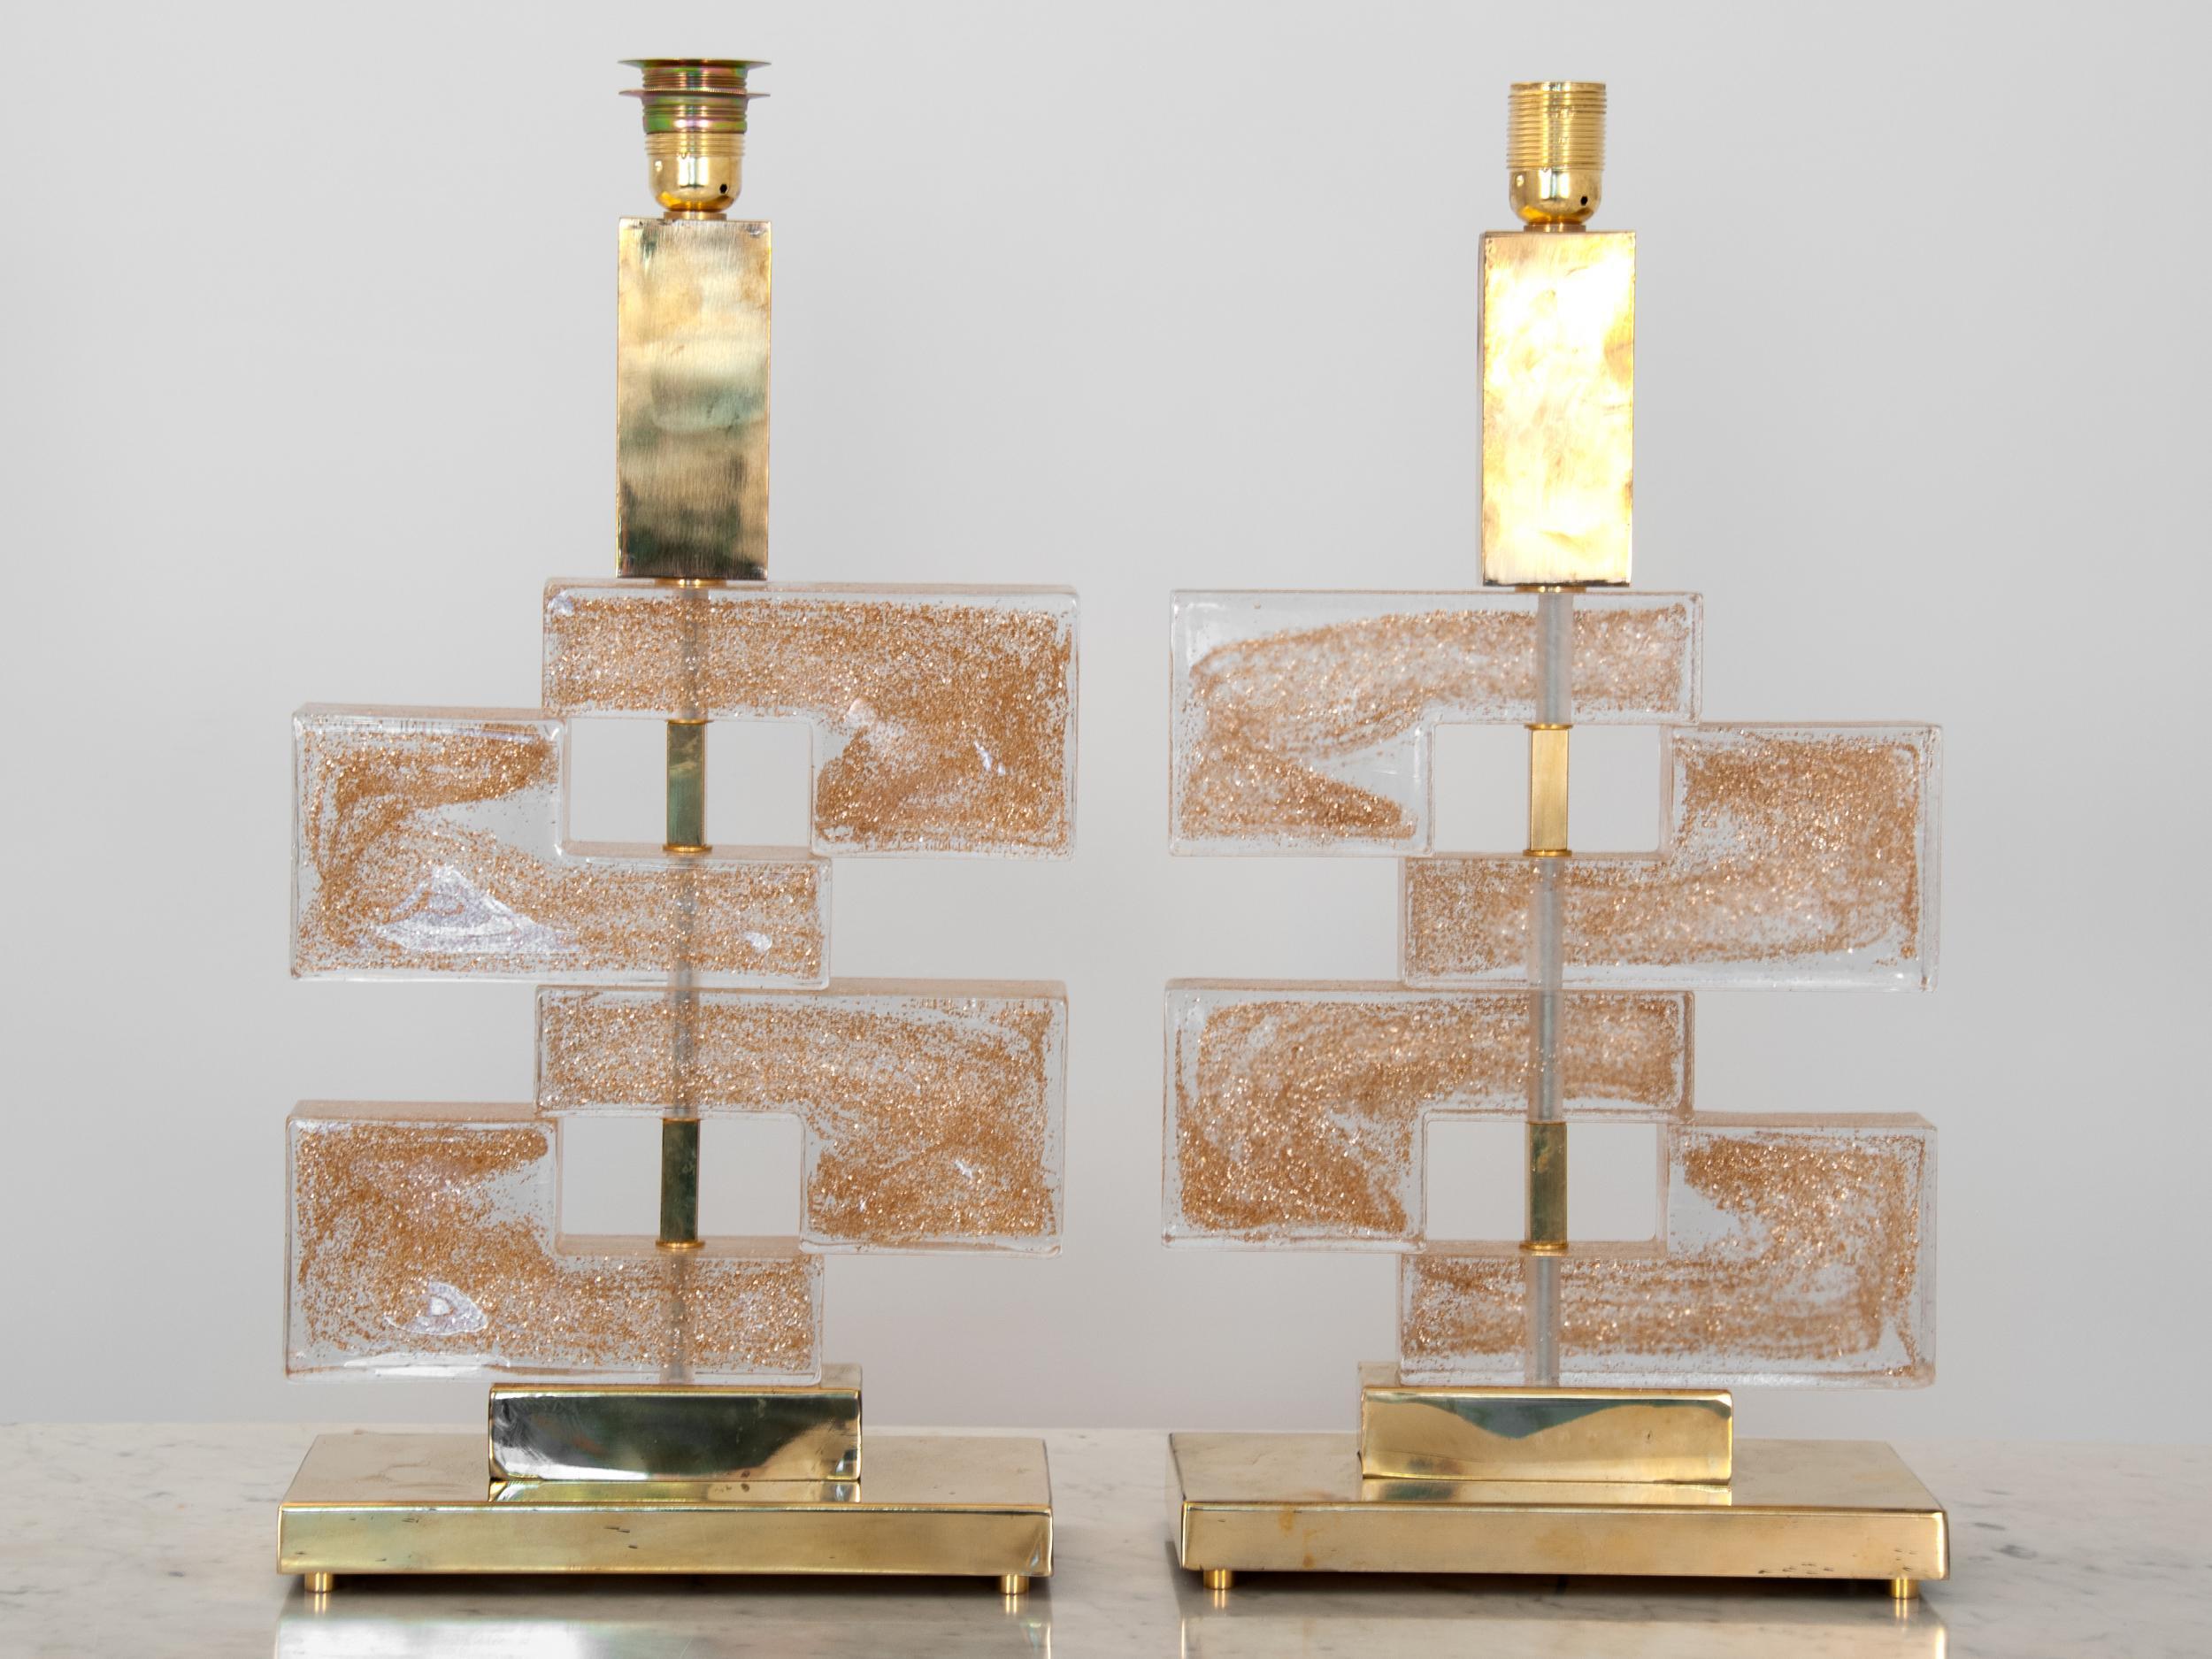 A pair of stunning Murano glass lamps with hand blown gold-flecked clear glass. The stacked geometric glass pieces marry up on a brass body creating a contemporary look with each glass shape showing their subtle handmade differences. Rewired for